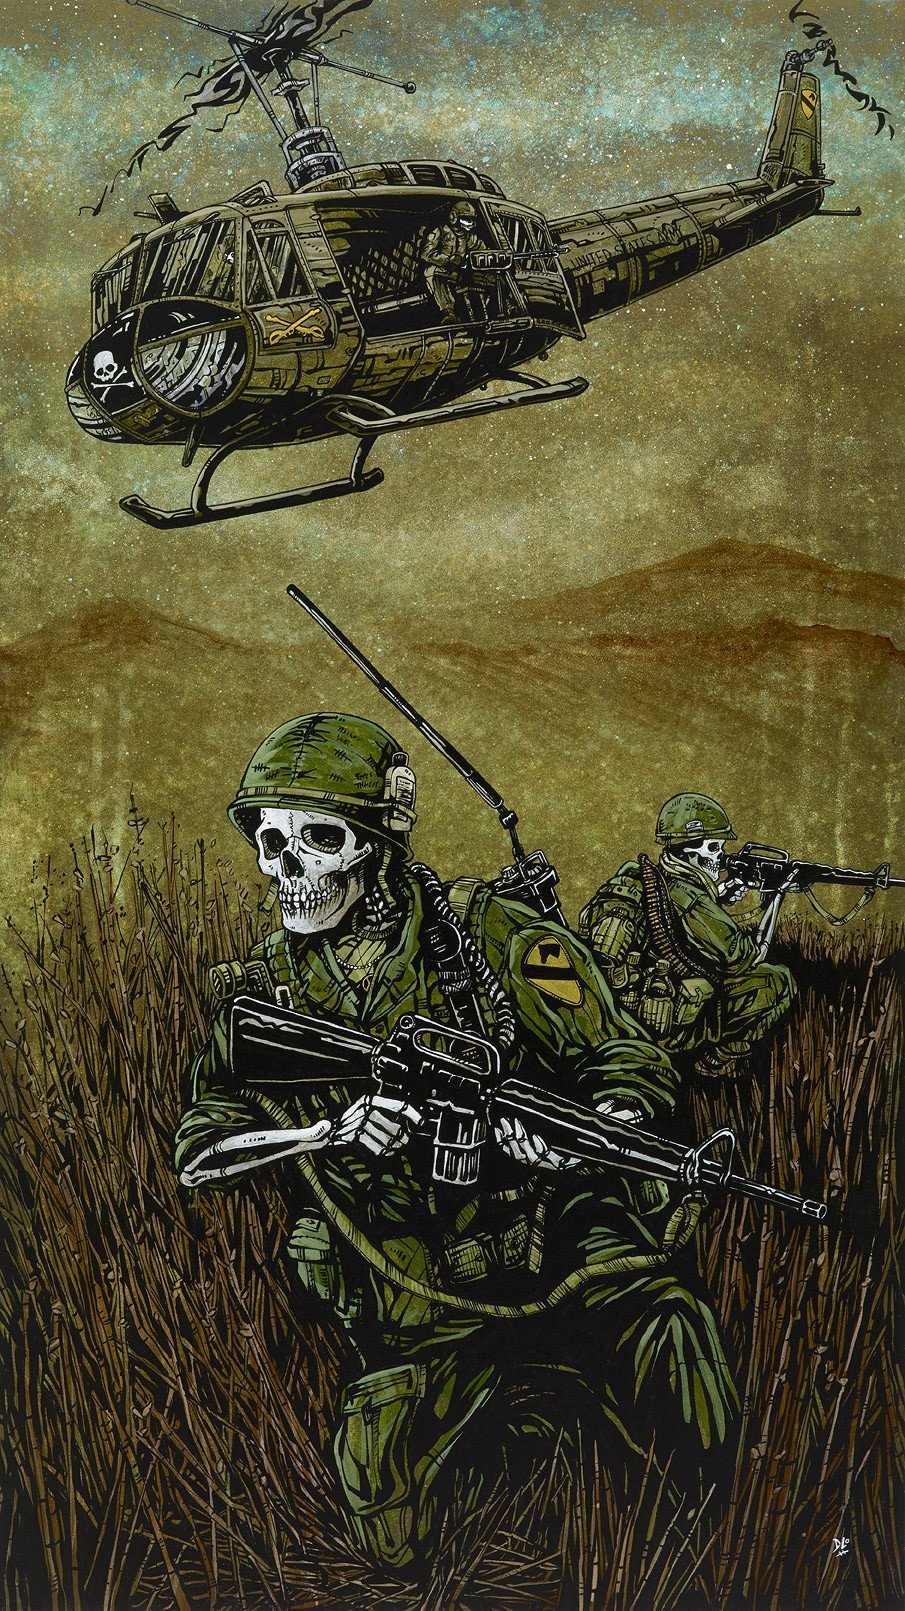 1st Air Cav by Day of the Dead Artist David Lozeau, Day of the Dead Art, Dia de los Muertos Art, Dia de los Muertos Artist